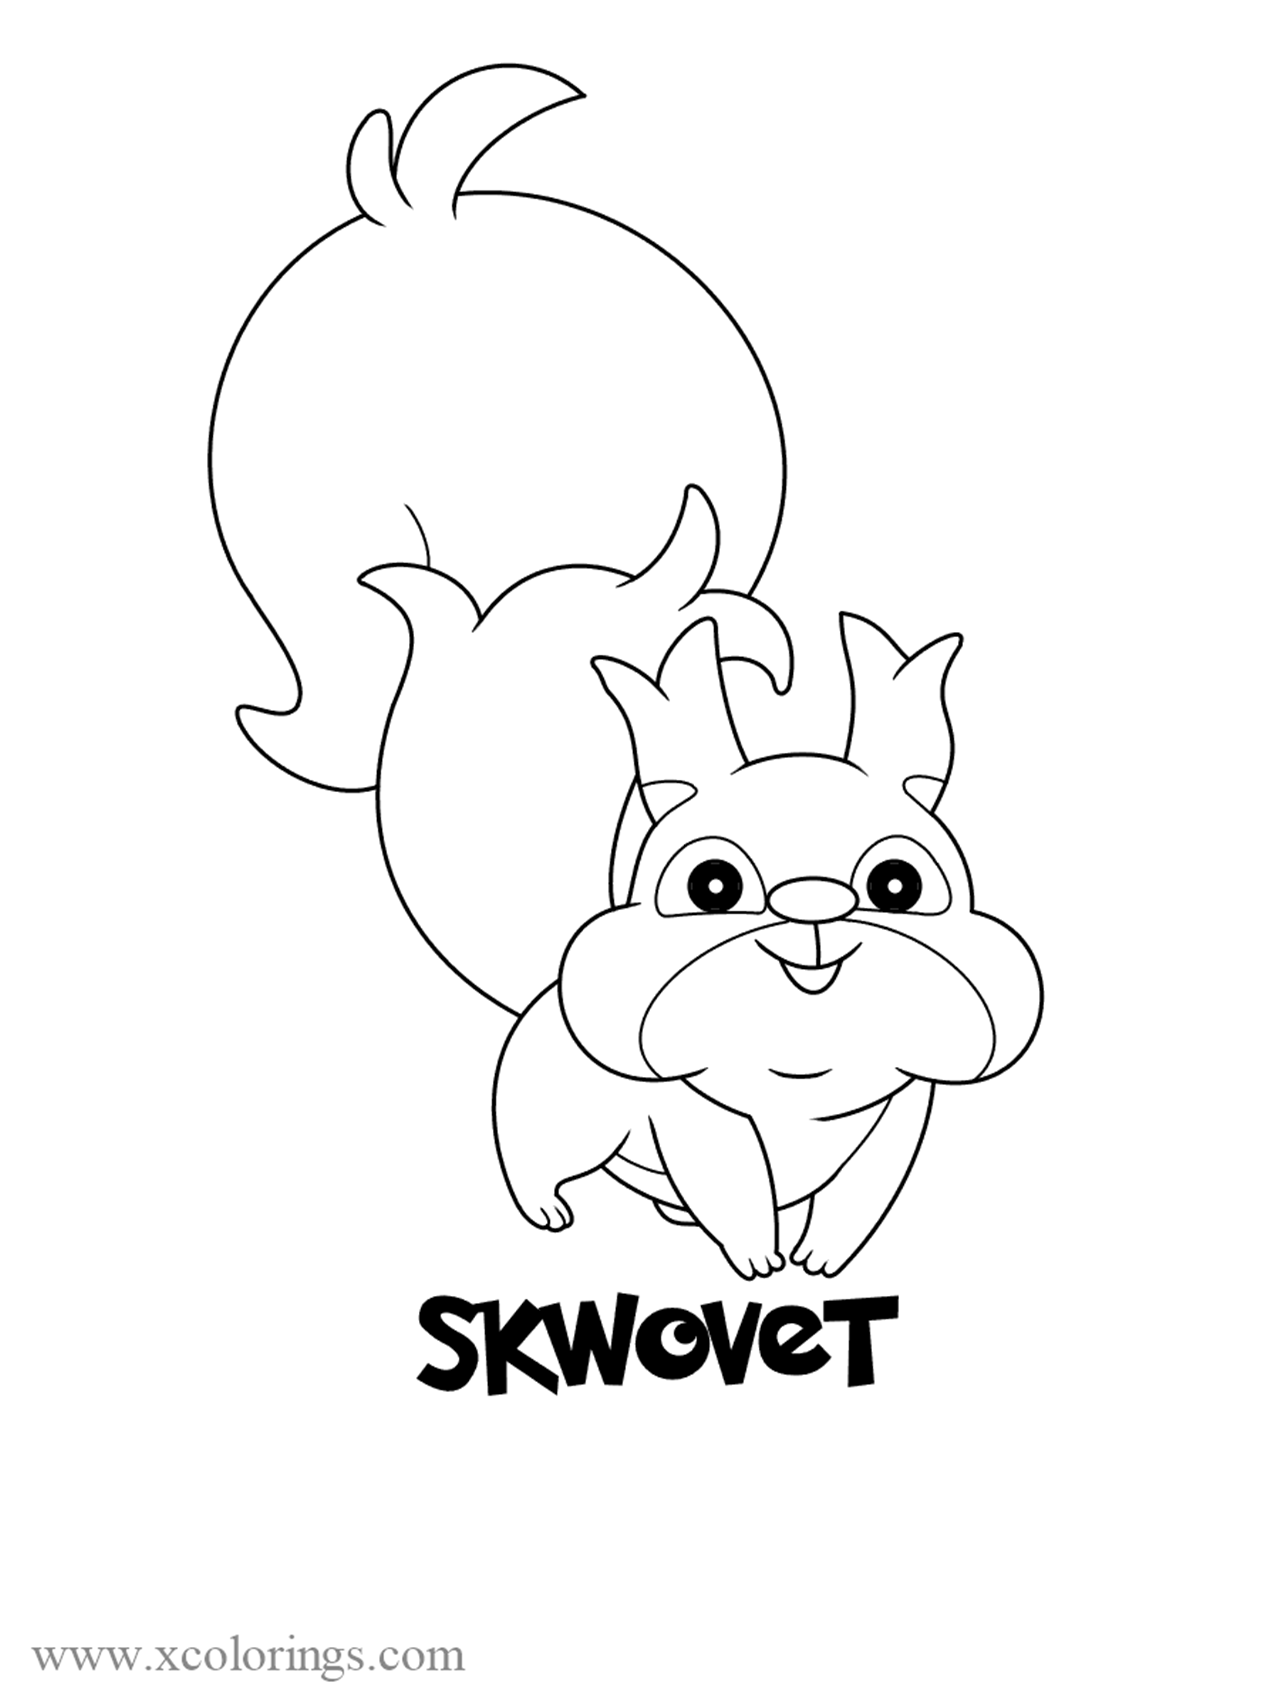 Free Pokemon sword and shield Skwovet Coloring Pages printable